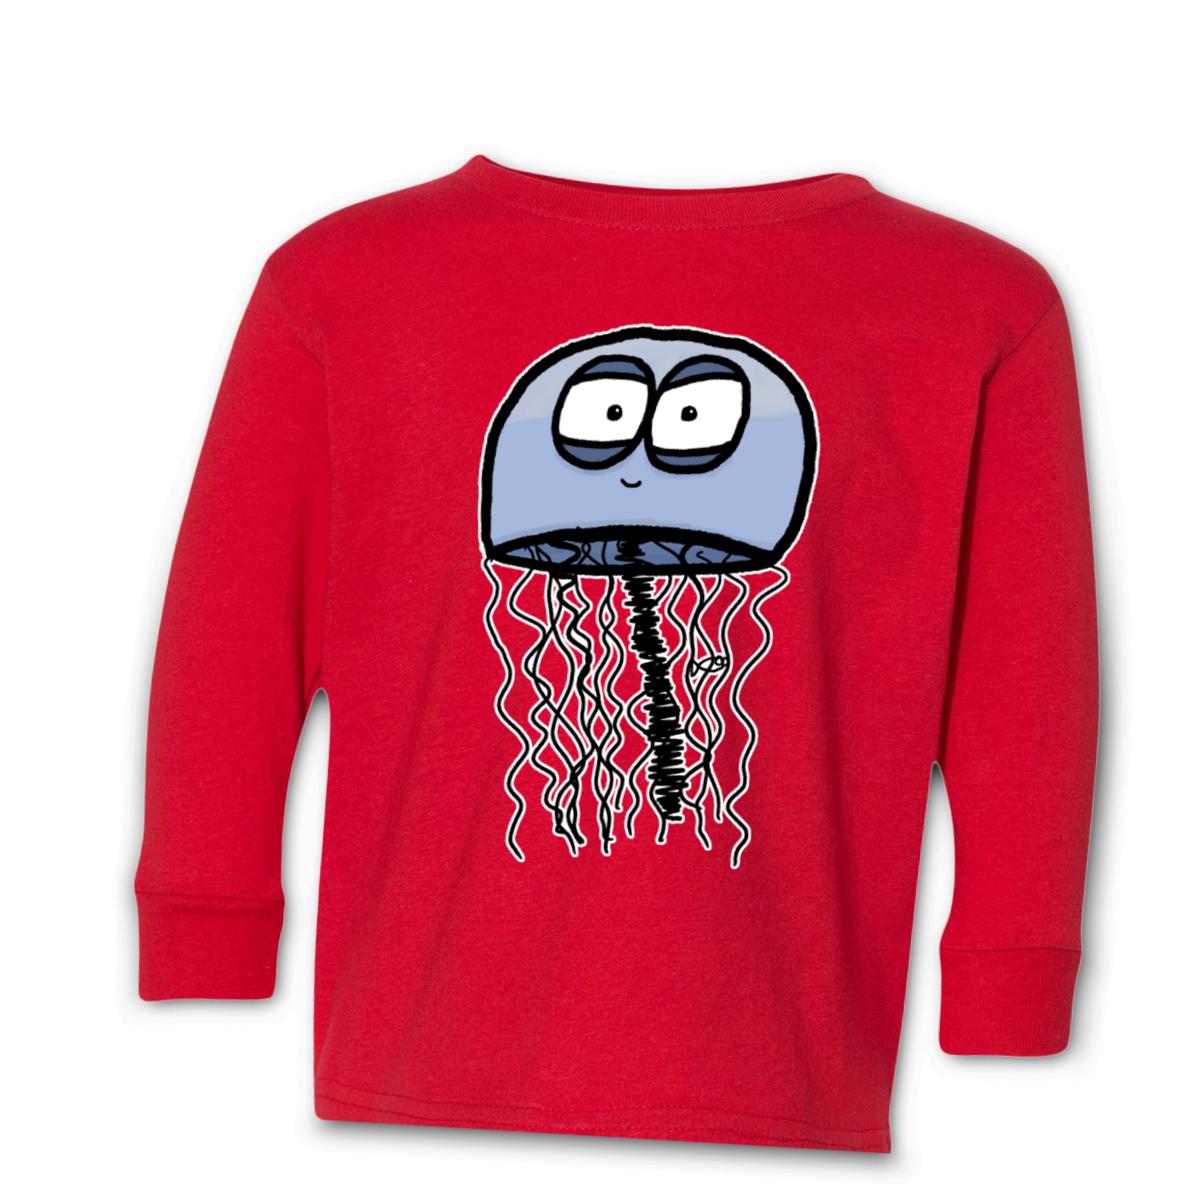 Jelly Fish Kid's Long Sleeve Tee Small red